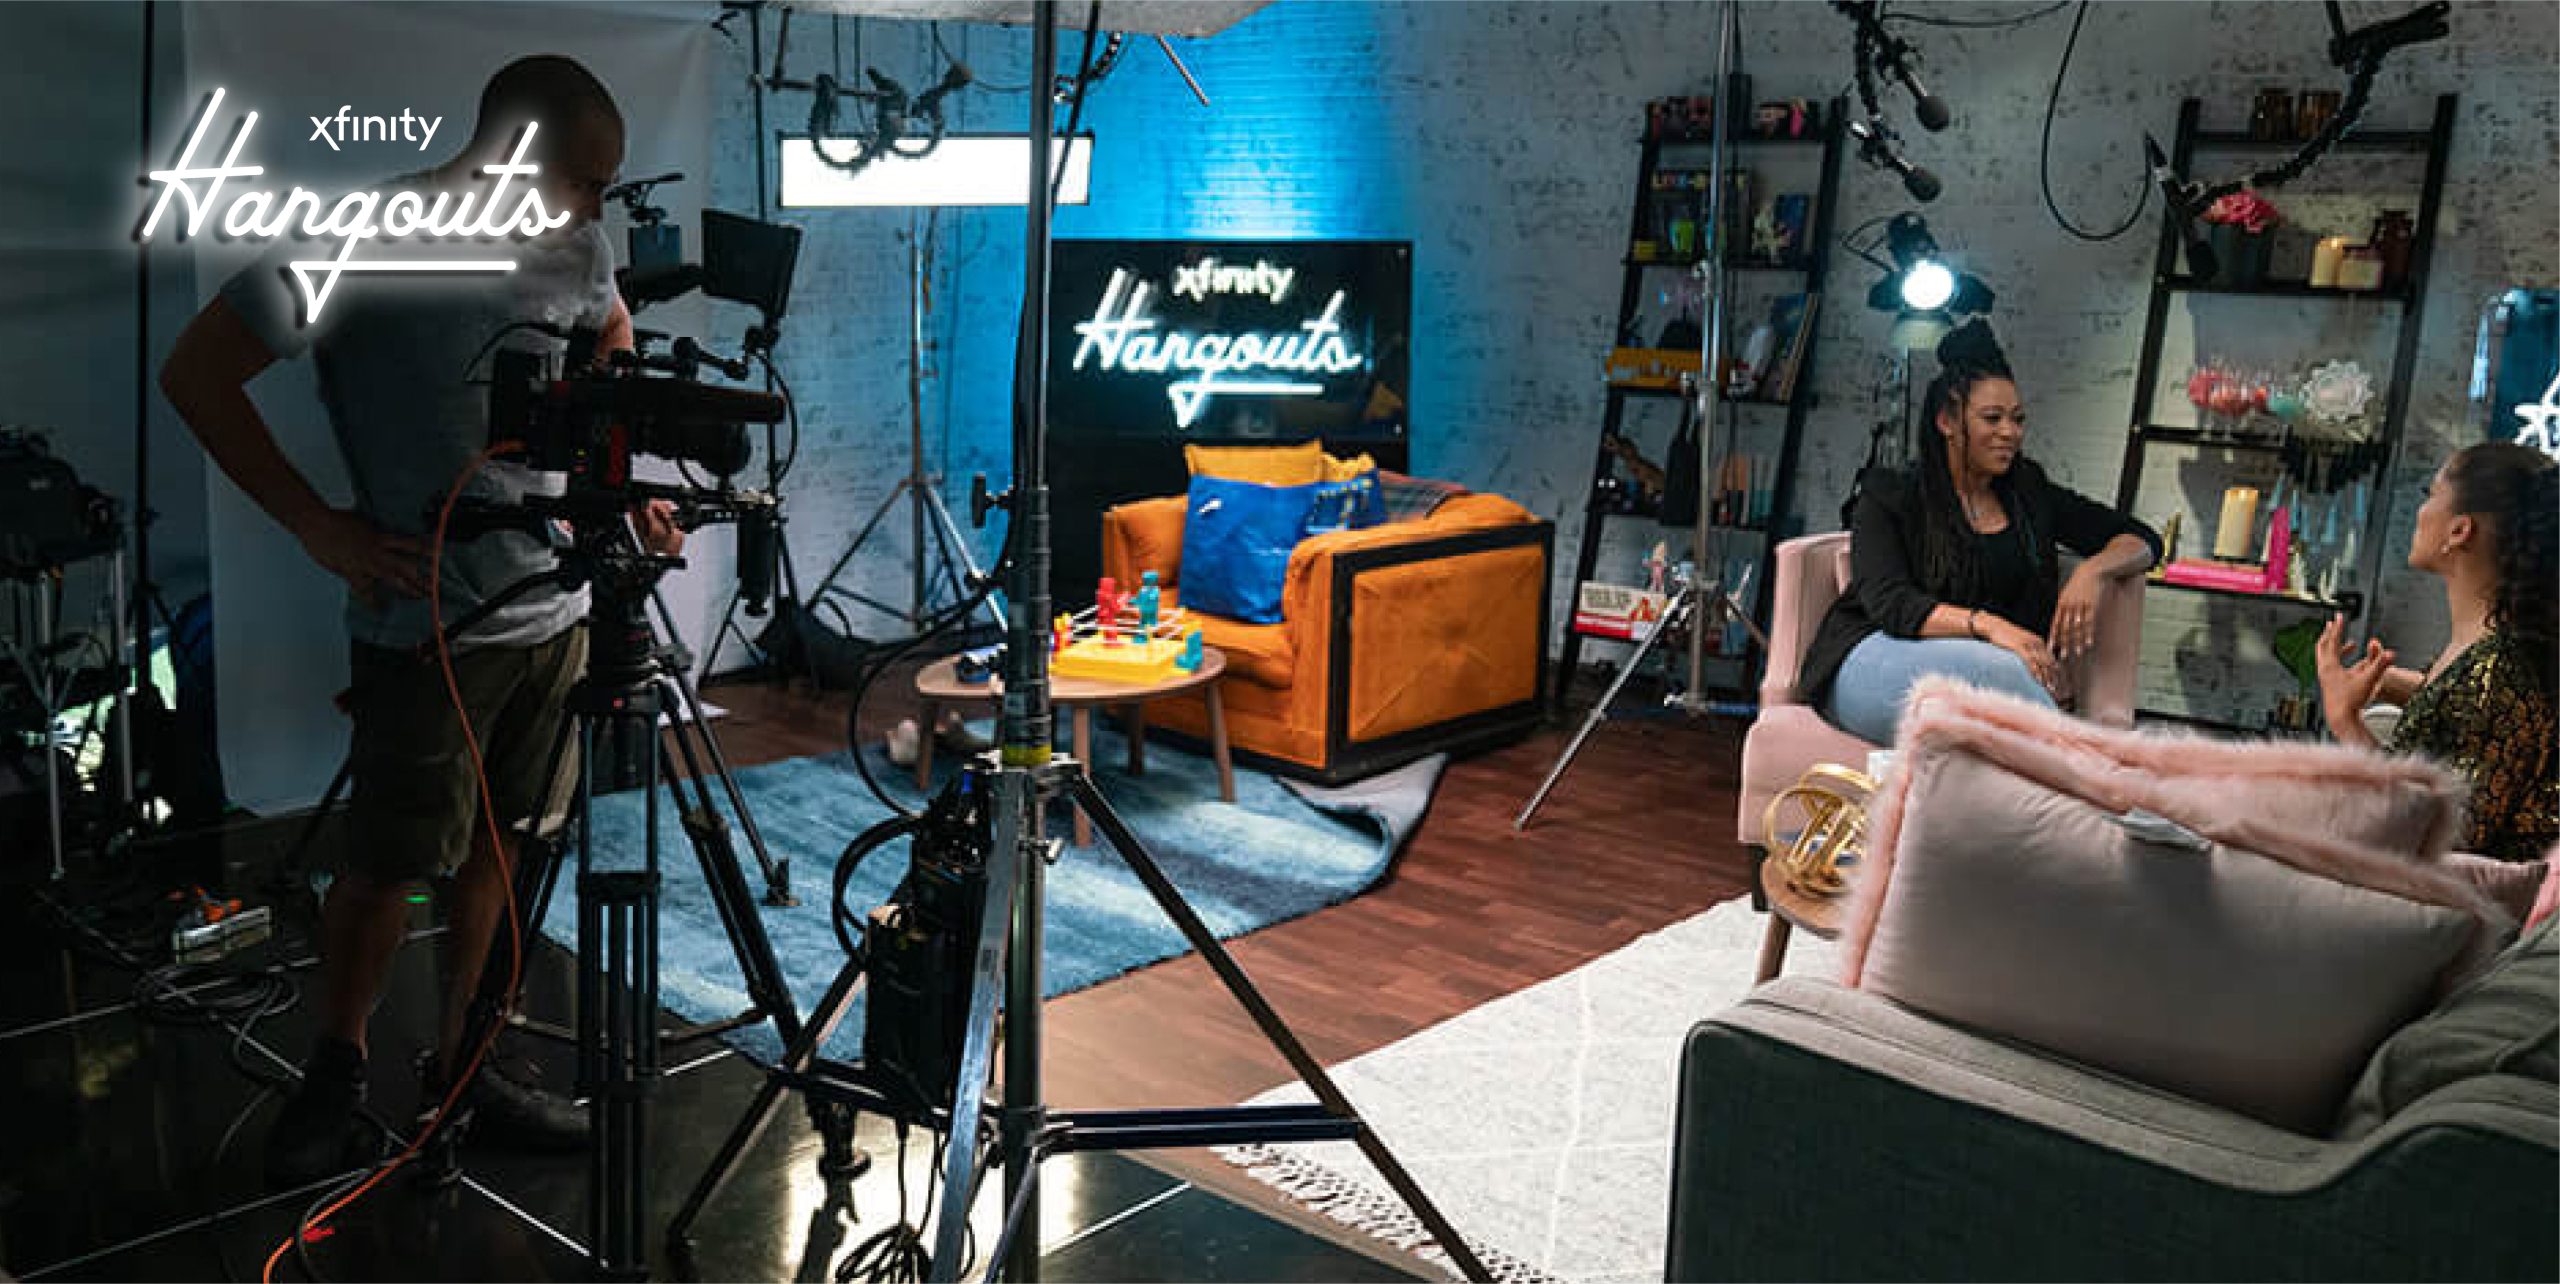 Behind the Scenes of the Xfinity Hangouts Set